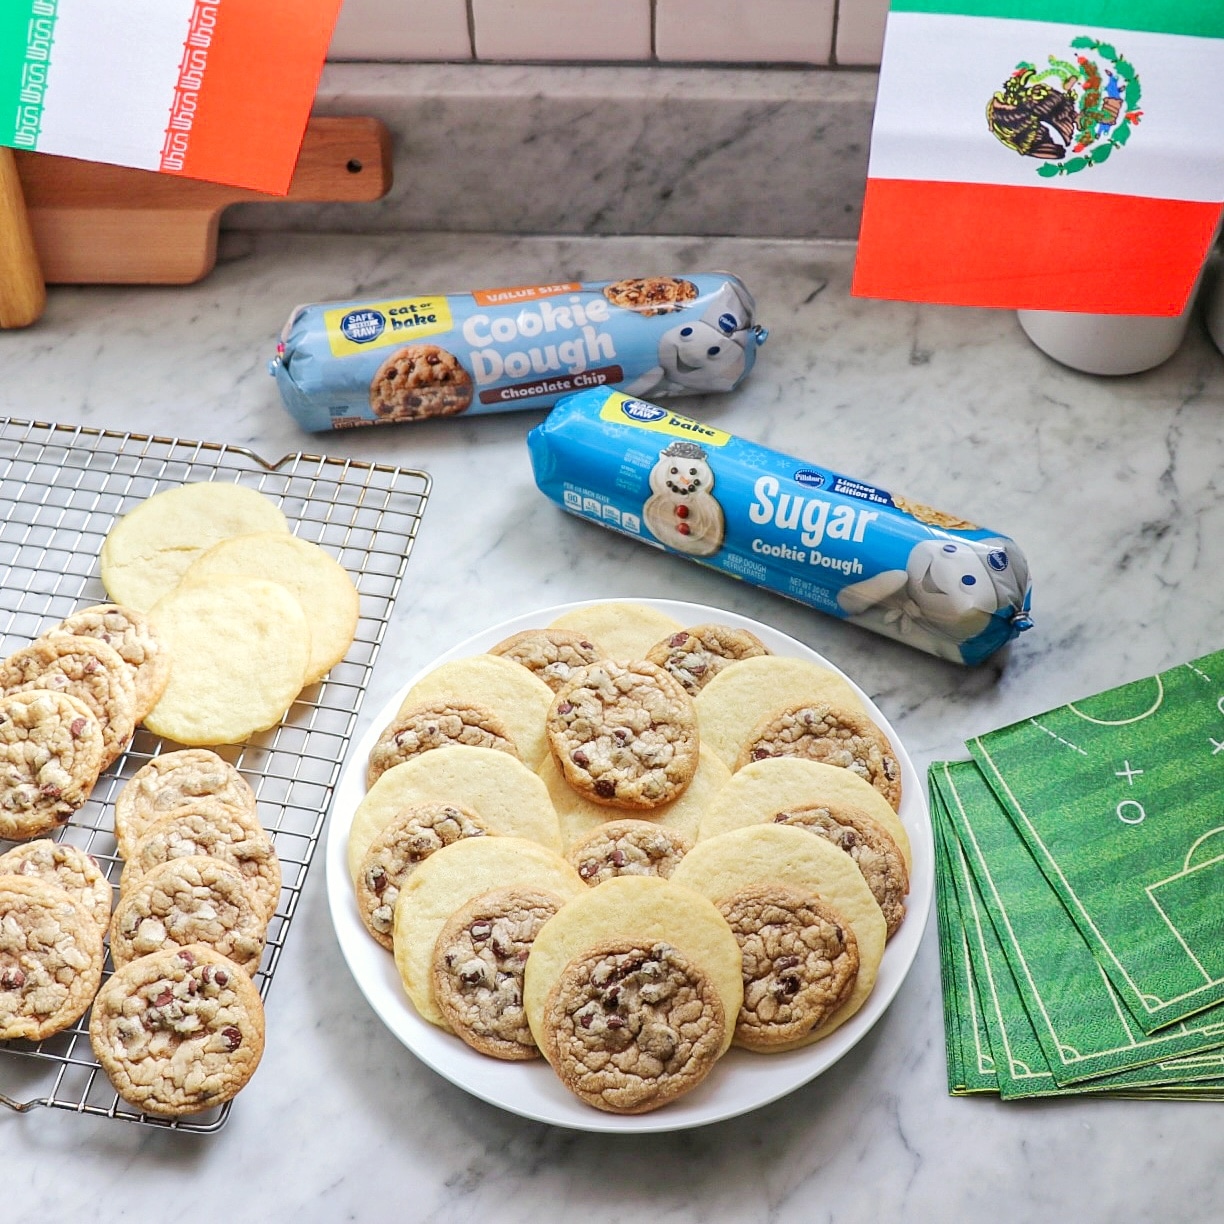 World Cup watch party or soccer birthday party food ideas